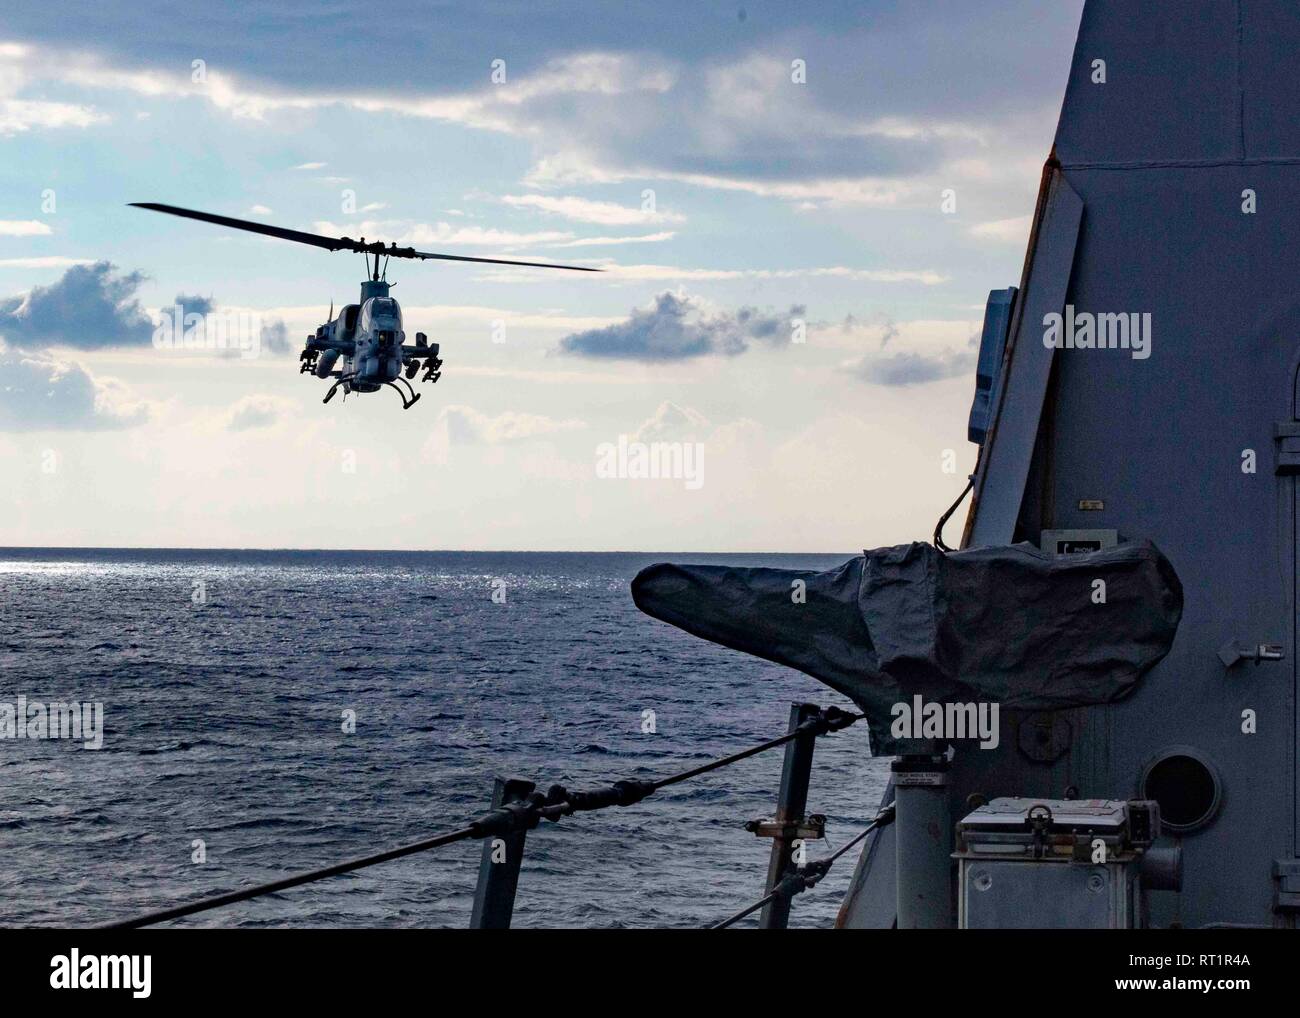 190221-N-HG389-0051 MEDITERRANEAN SEA (Feb. 21, 2019) An AH-1W Super Cobra helicopter assigned to the “Black Knights” of Marine Medium Tiltrotor Squadron (VMM) 264 (Reinforced) flies by the San Antonio-class amphibious transport dock ship USS Arlington (LPD 24), Feb. 21, 2019. Arlington is on a scheduled deployment as part of the Kearsarge Amphibious Ready Group in support of maritime security operations, crisis response and theater security cooperation, while also providing a forward naval presence. (U.S. Navy photo by Mass Communication Specialist 2nd Class Brandon Parker/Released) Stock Photo